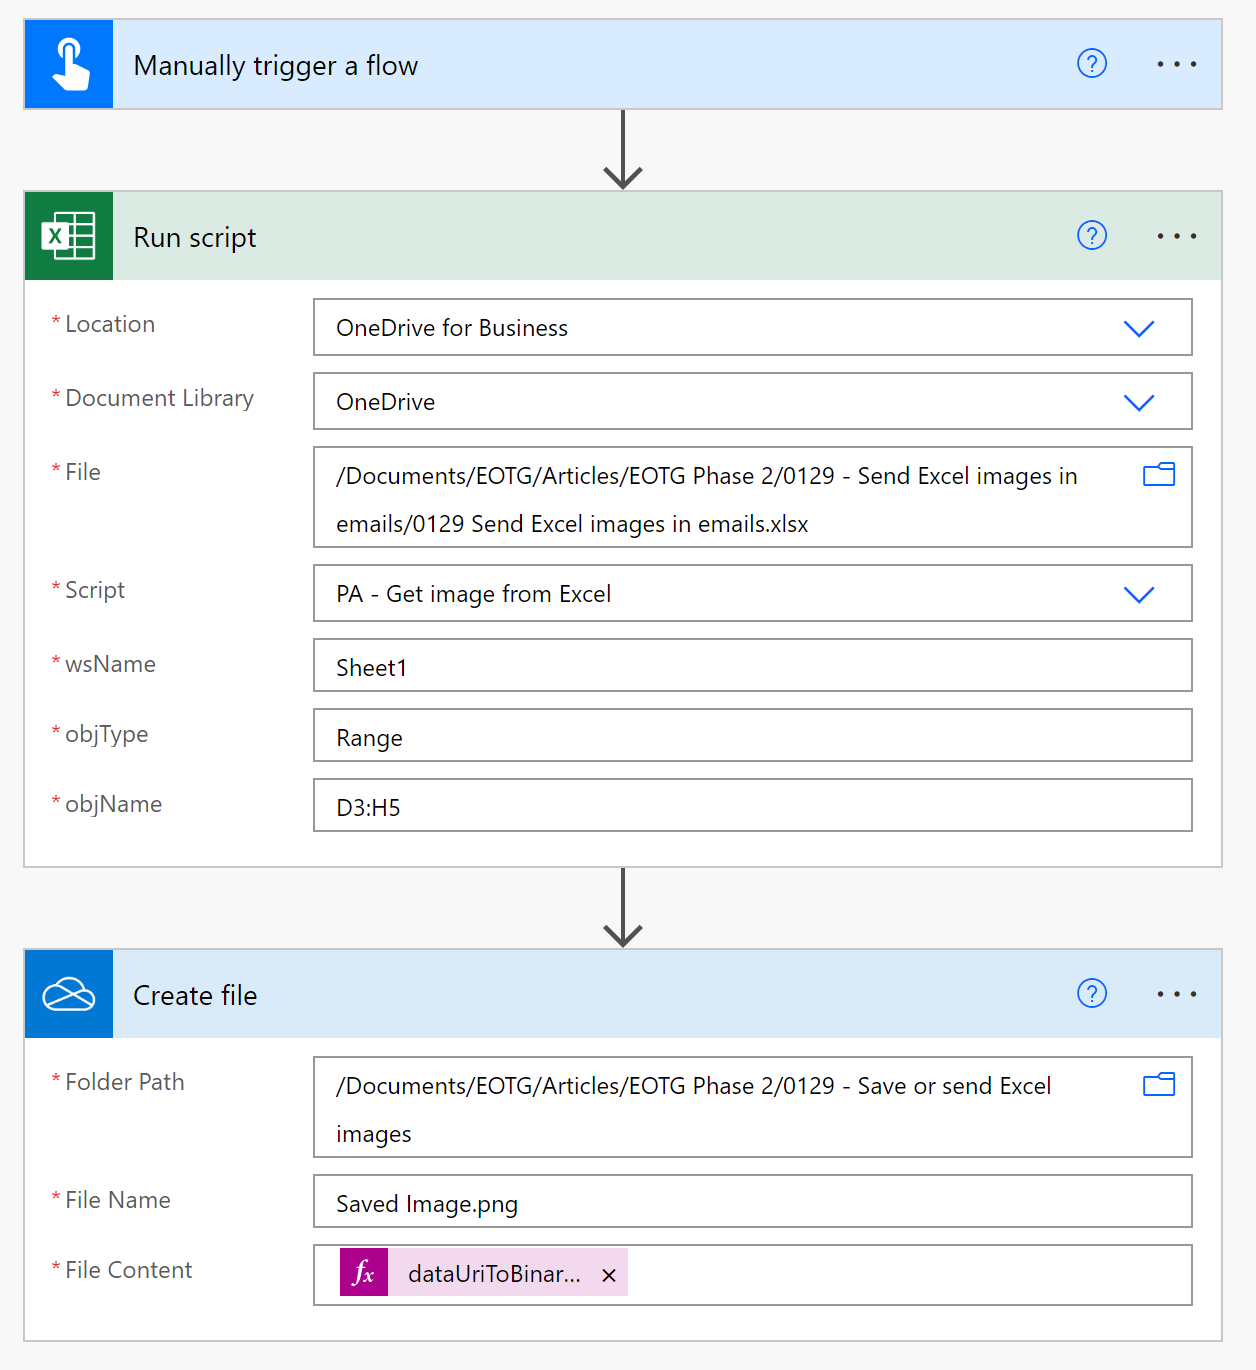 Save image to OneDrive or SharePoint